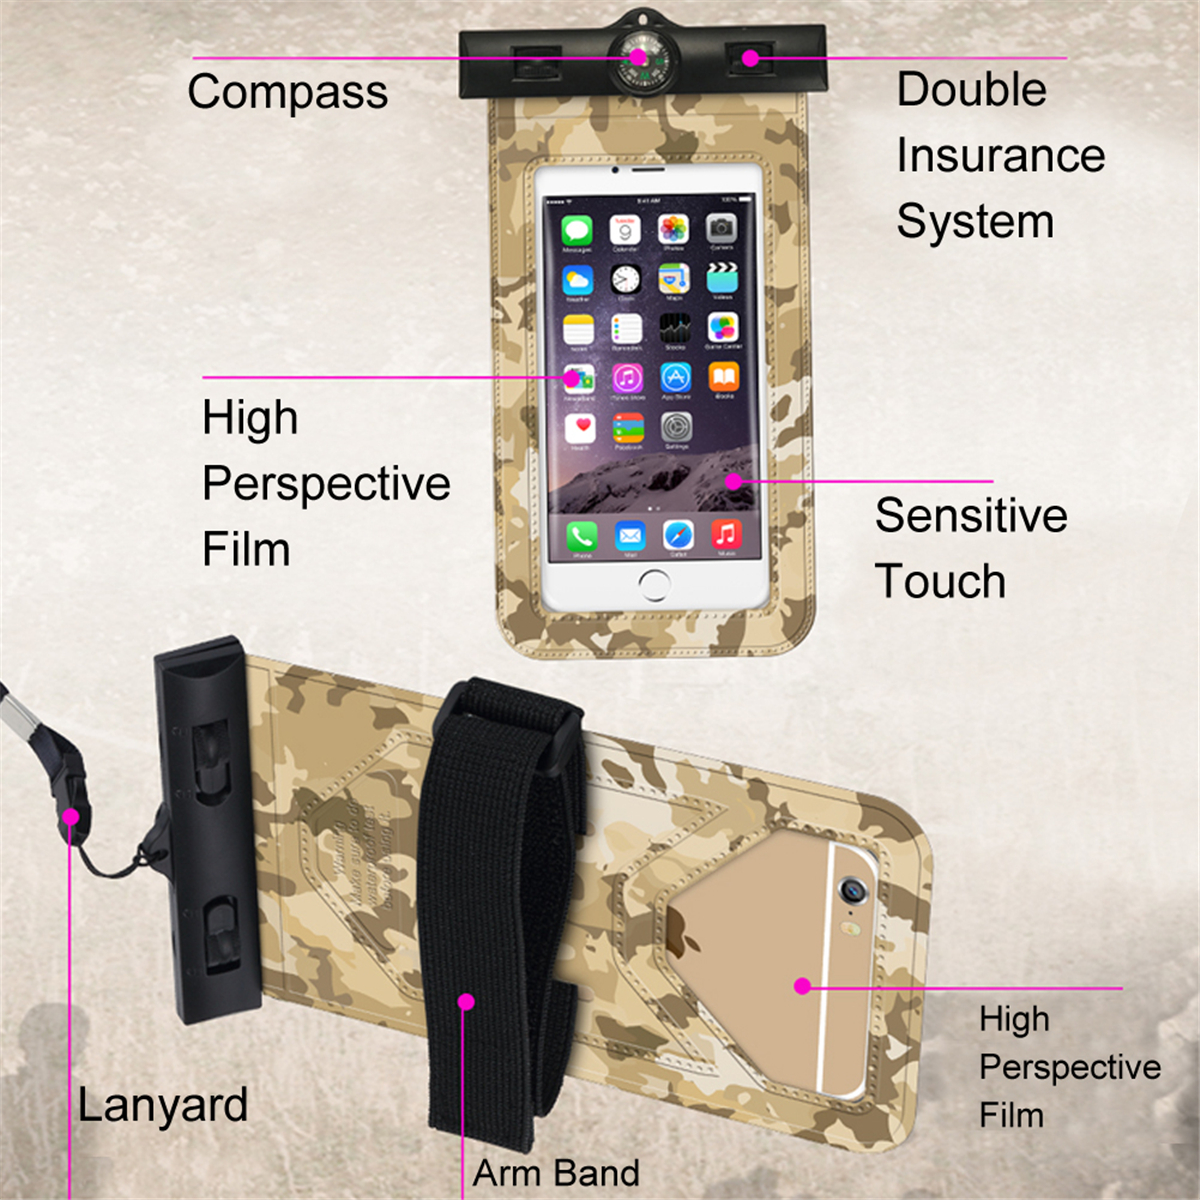 Universal-Sport-Screen-Touch-Waterproof-Lanyard-Bag-Arm-Band-for-Xiaomi-Mobile-Phone-Under-6-inch-No-1443363-4